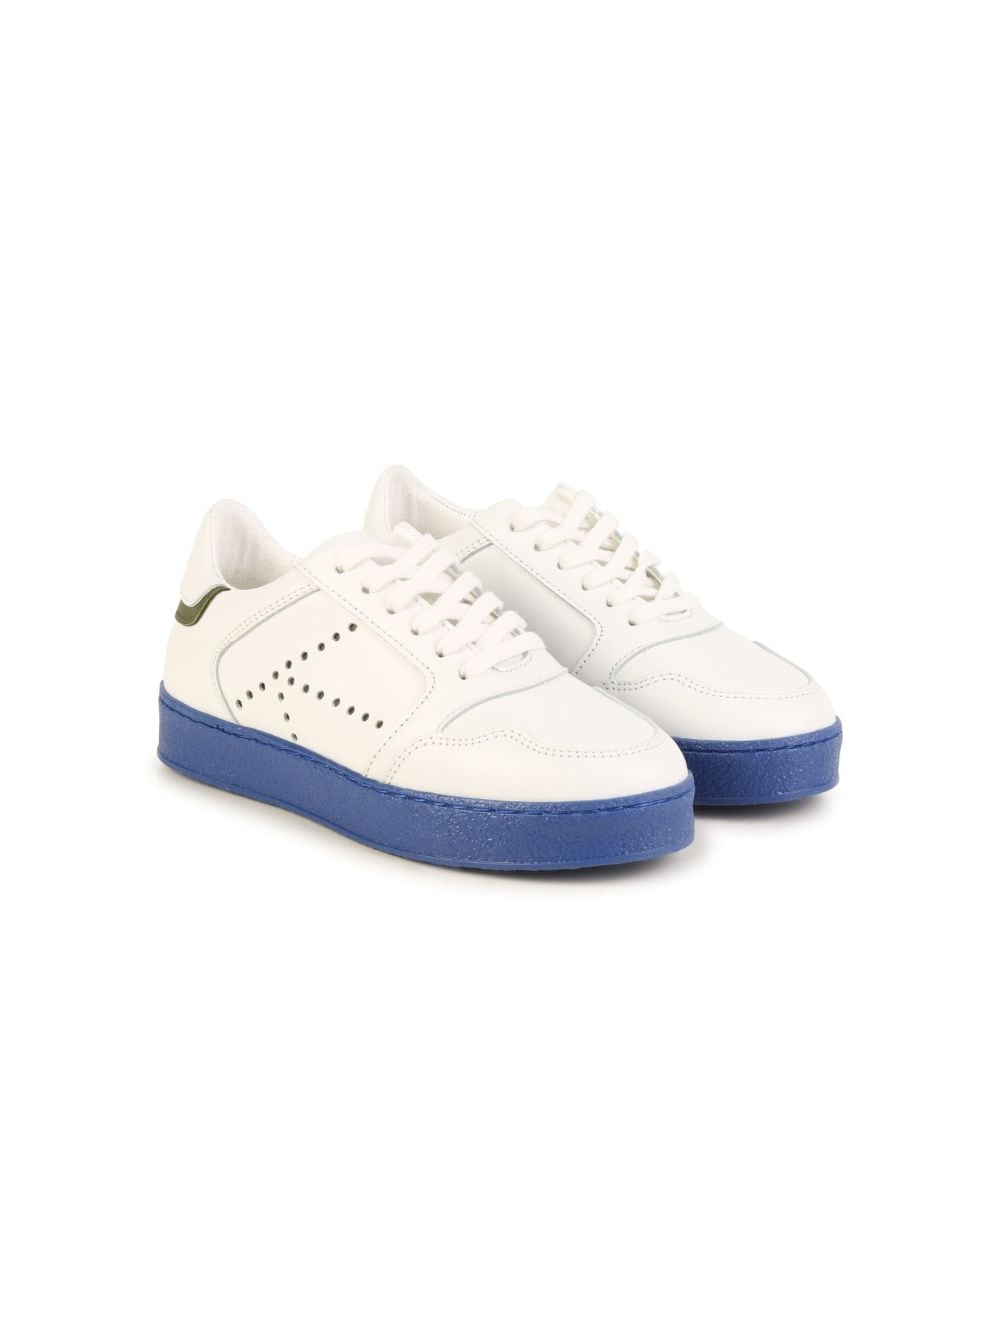 Kenzo Kids nappa-leather lace-up sneakers - White